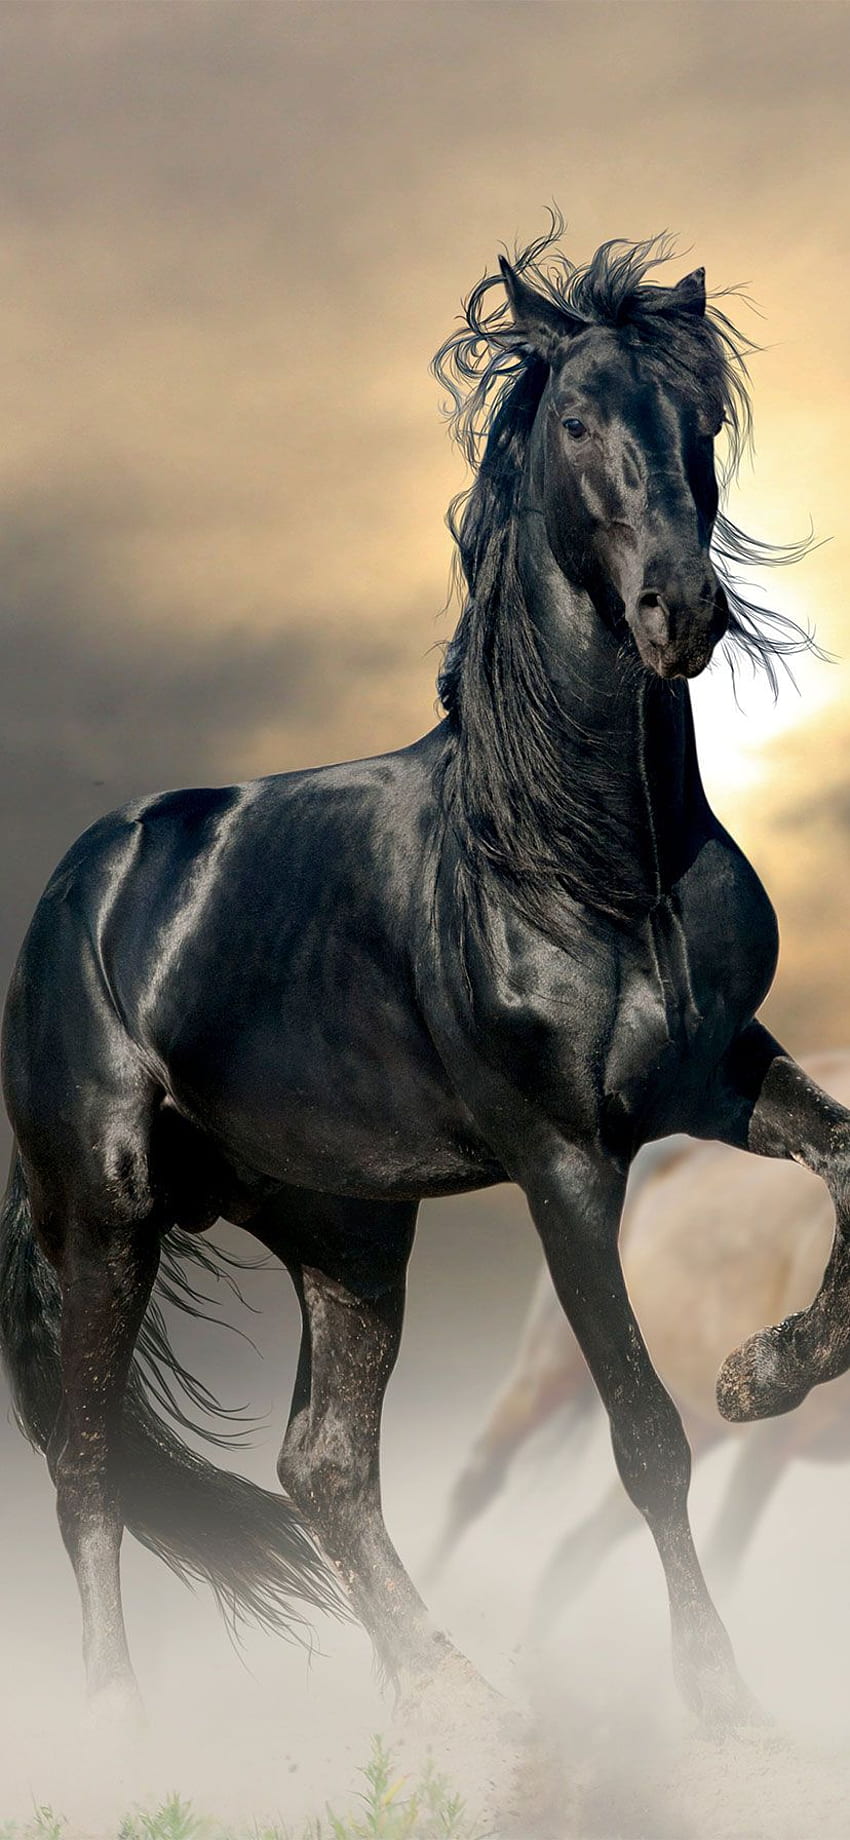 Horse Aesthetic Wallpapers  Aesthetic Horse Wallpaper for iPhone